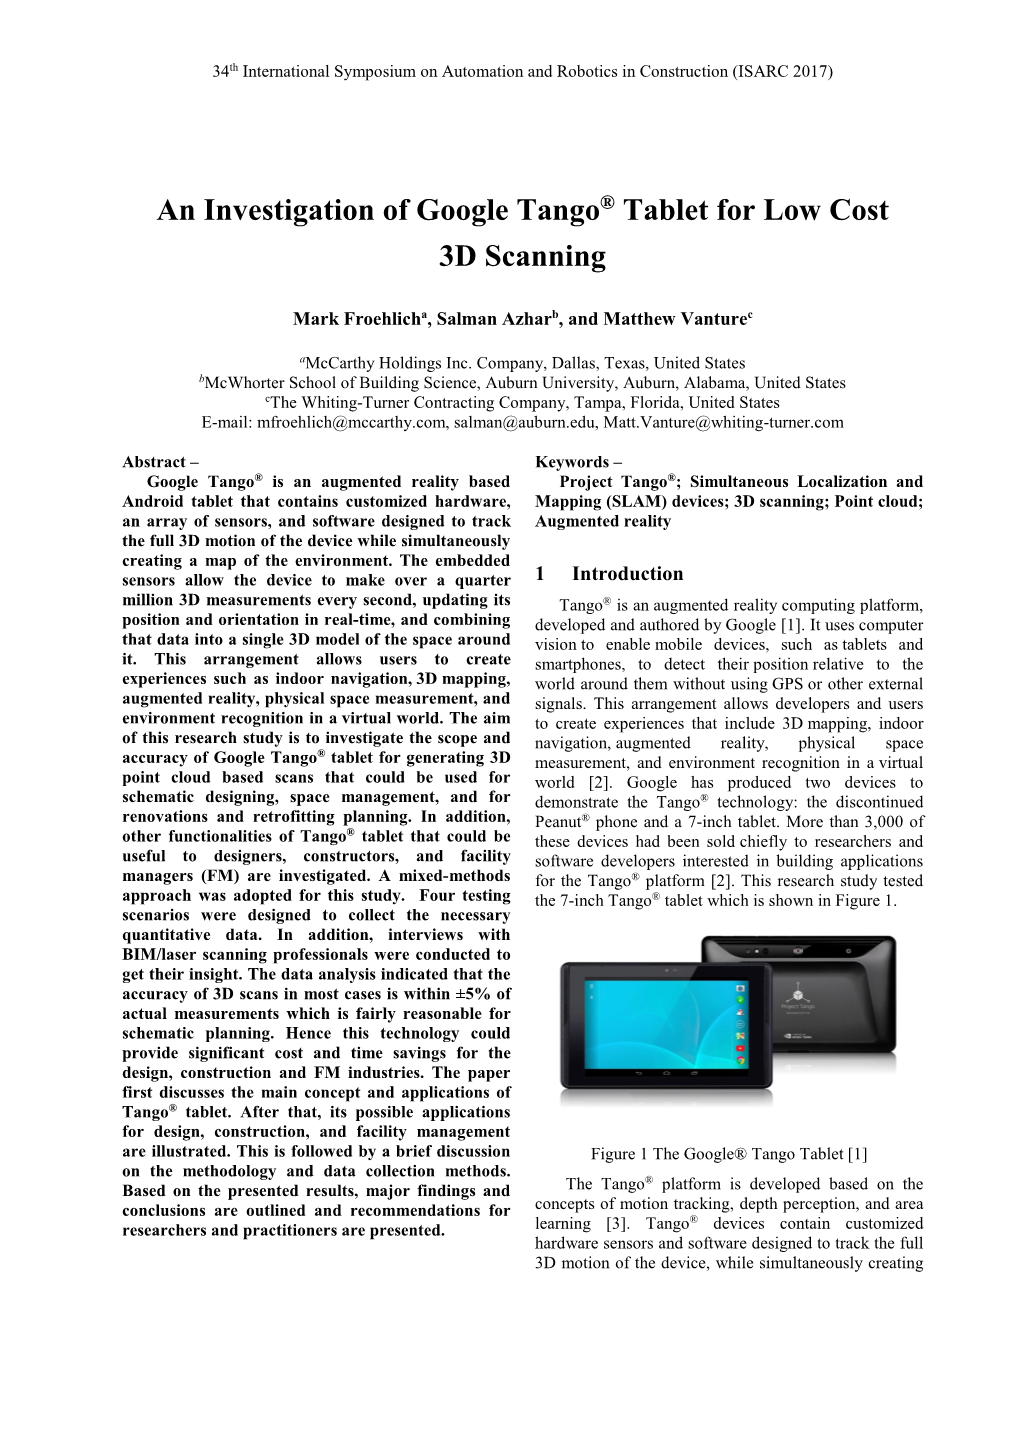 An Investigation of Google Tango® Tablet for Low Cost 3D Scanning